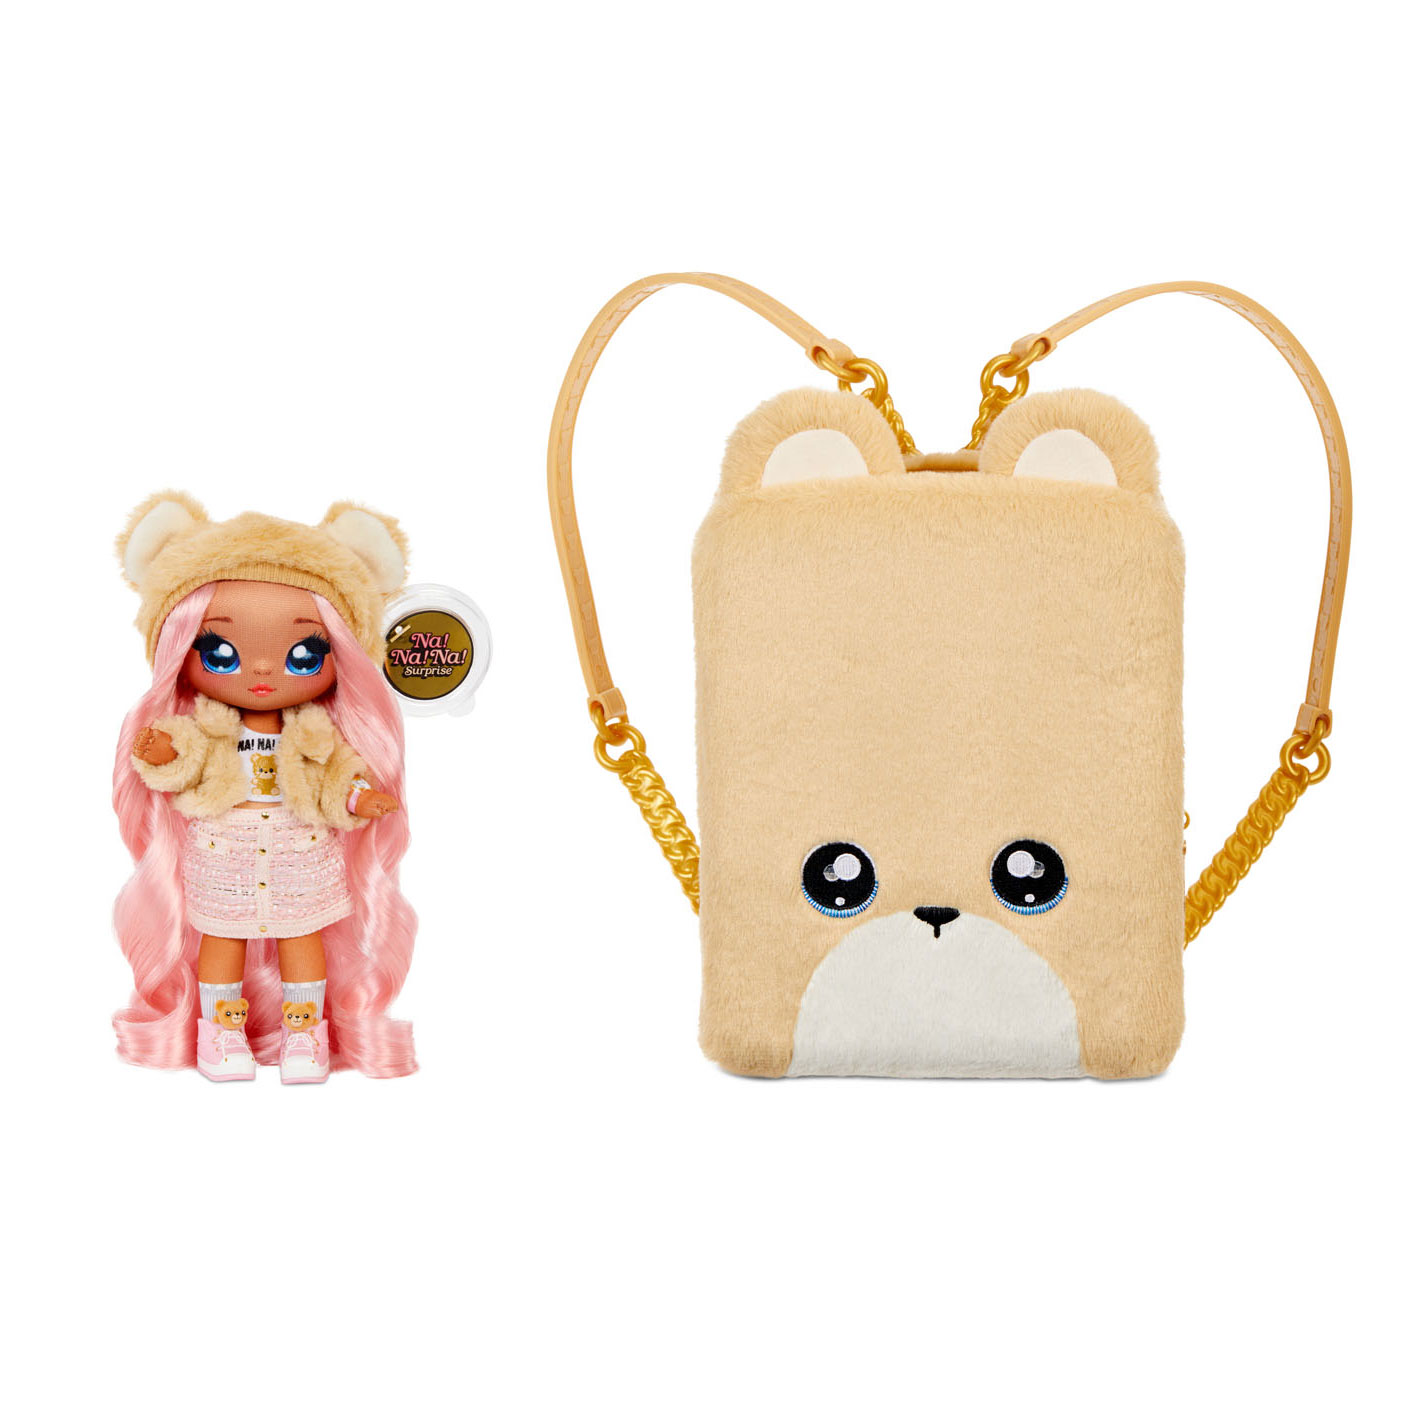 Na! Na! Na! Surprise 3-in-1 Backpack Bedroom Pink Bunny Playset with Limited Edition Doll